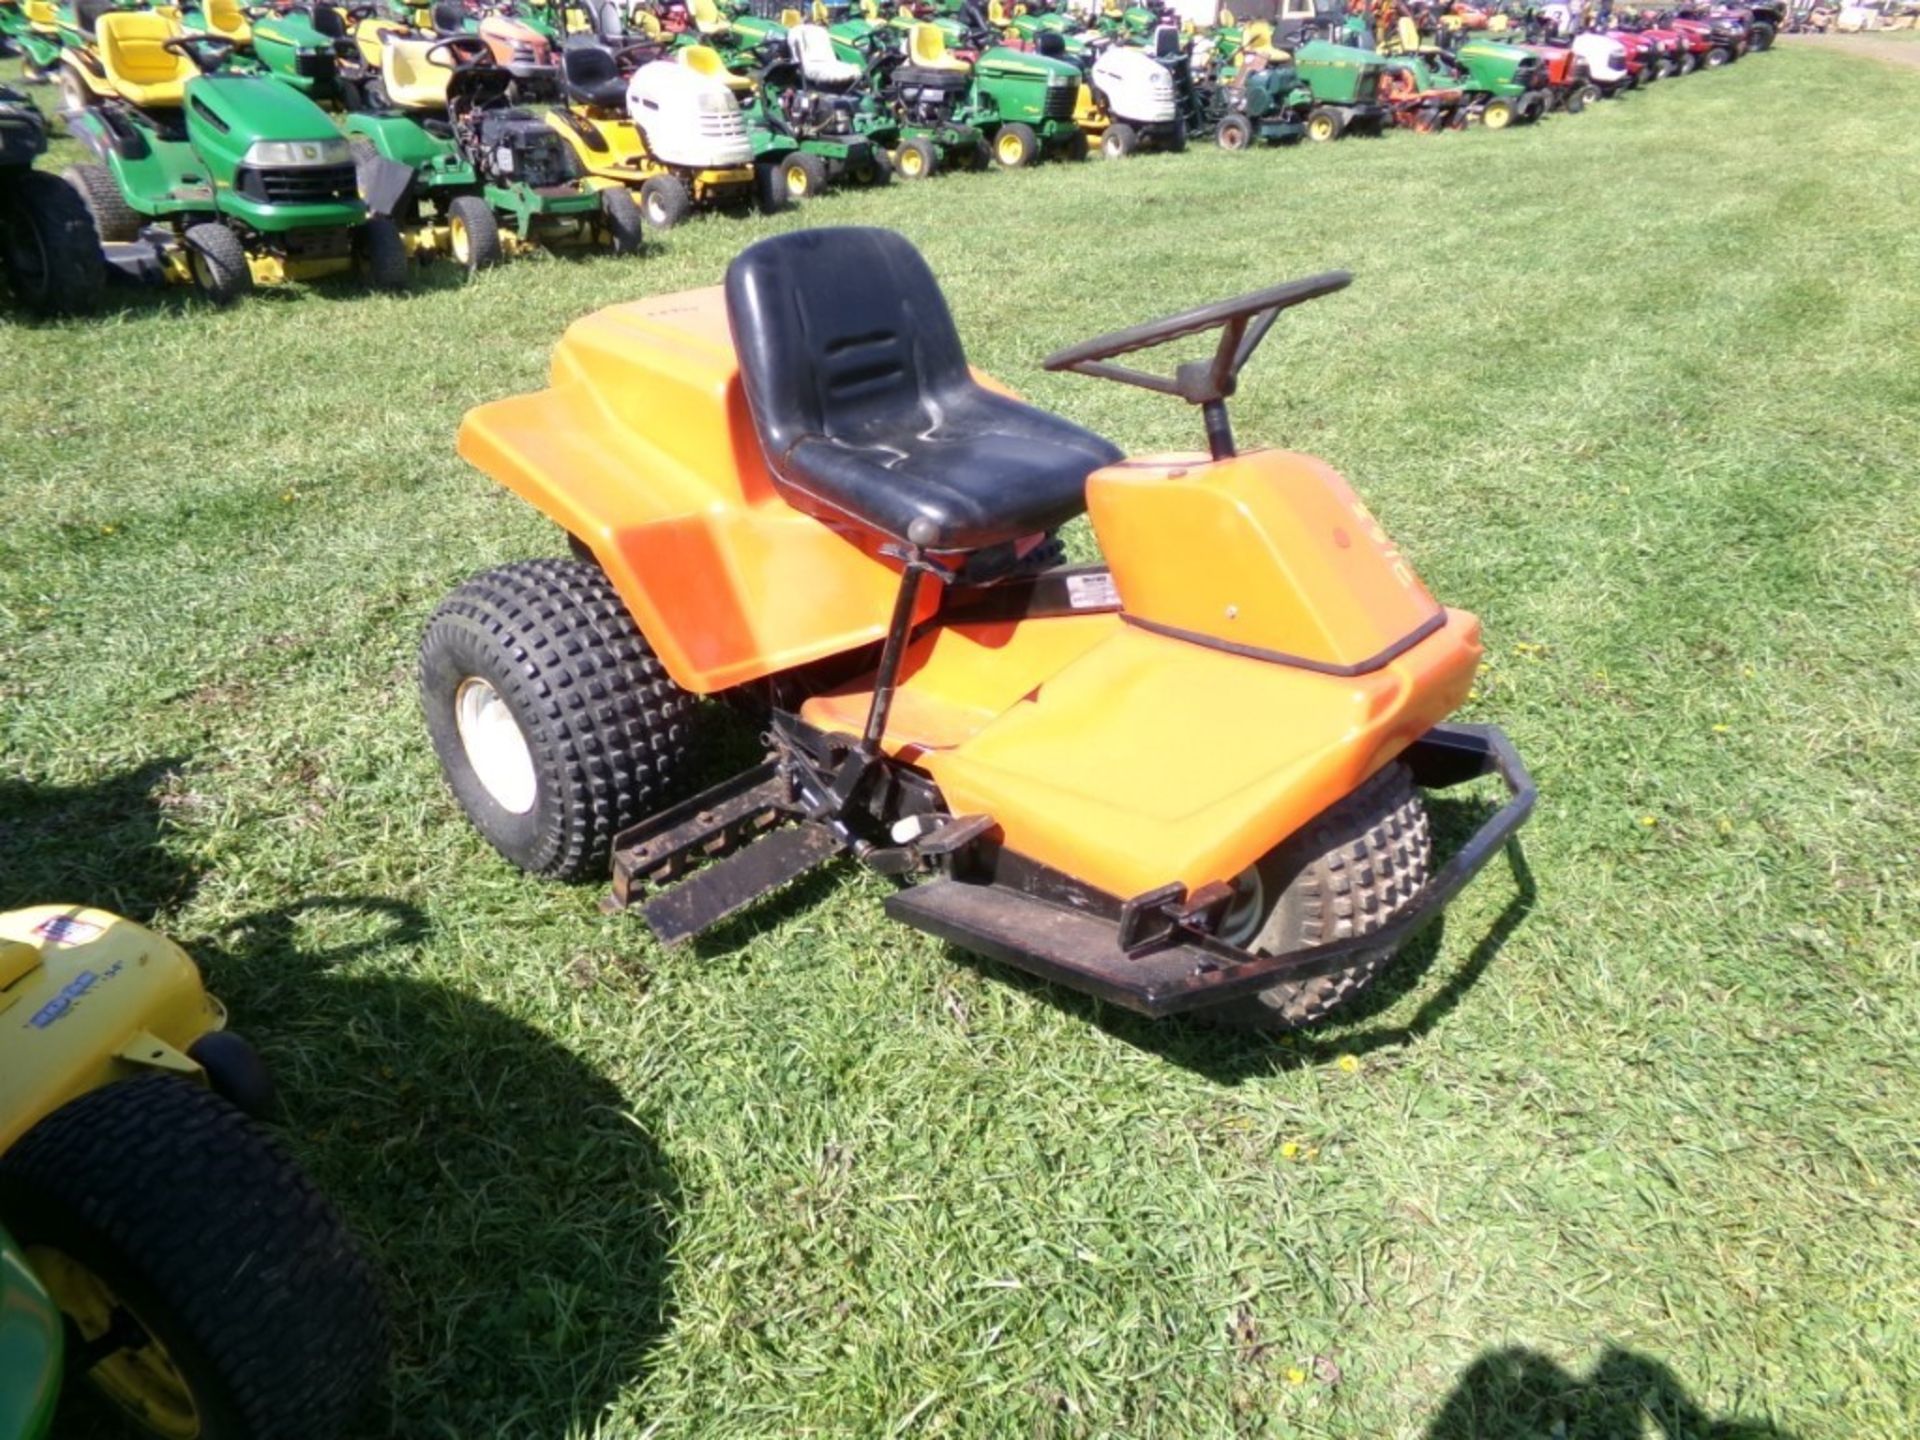 Smithco Golf Coarse Sand Pit/Baseball Infield Groomer with 3 Spd. Briggs and Stratton Engine (5977) - Image 2 of 2